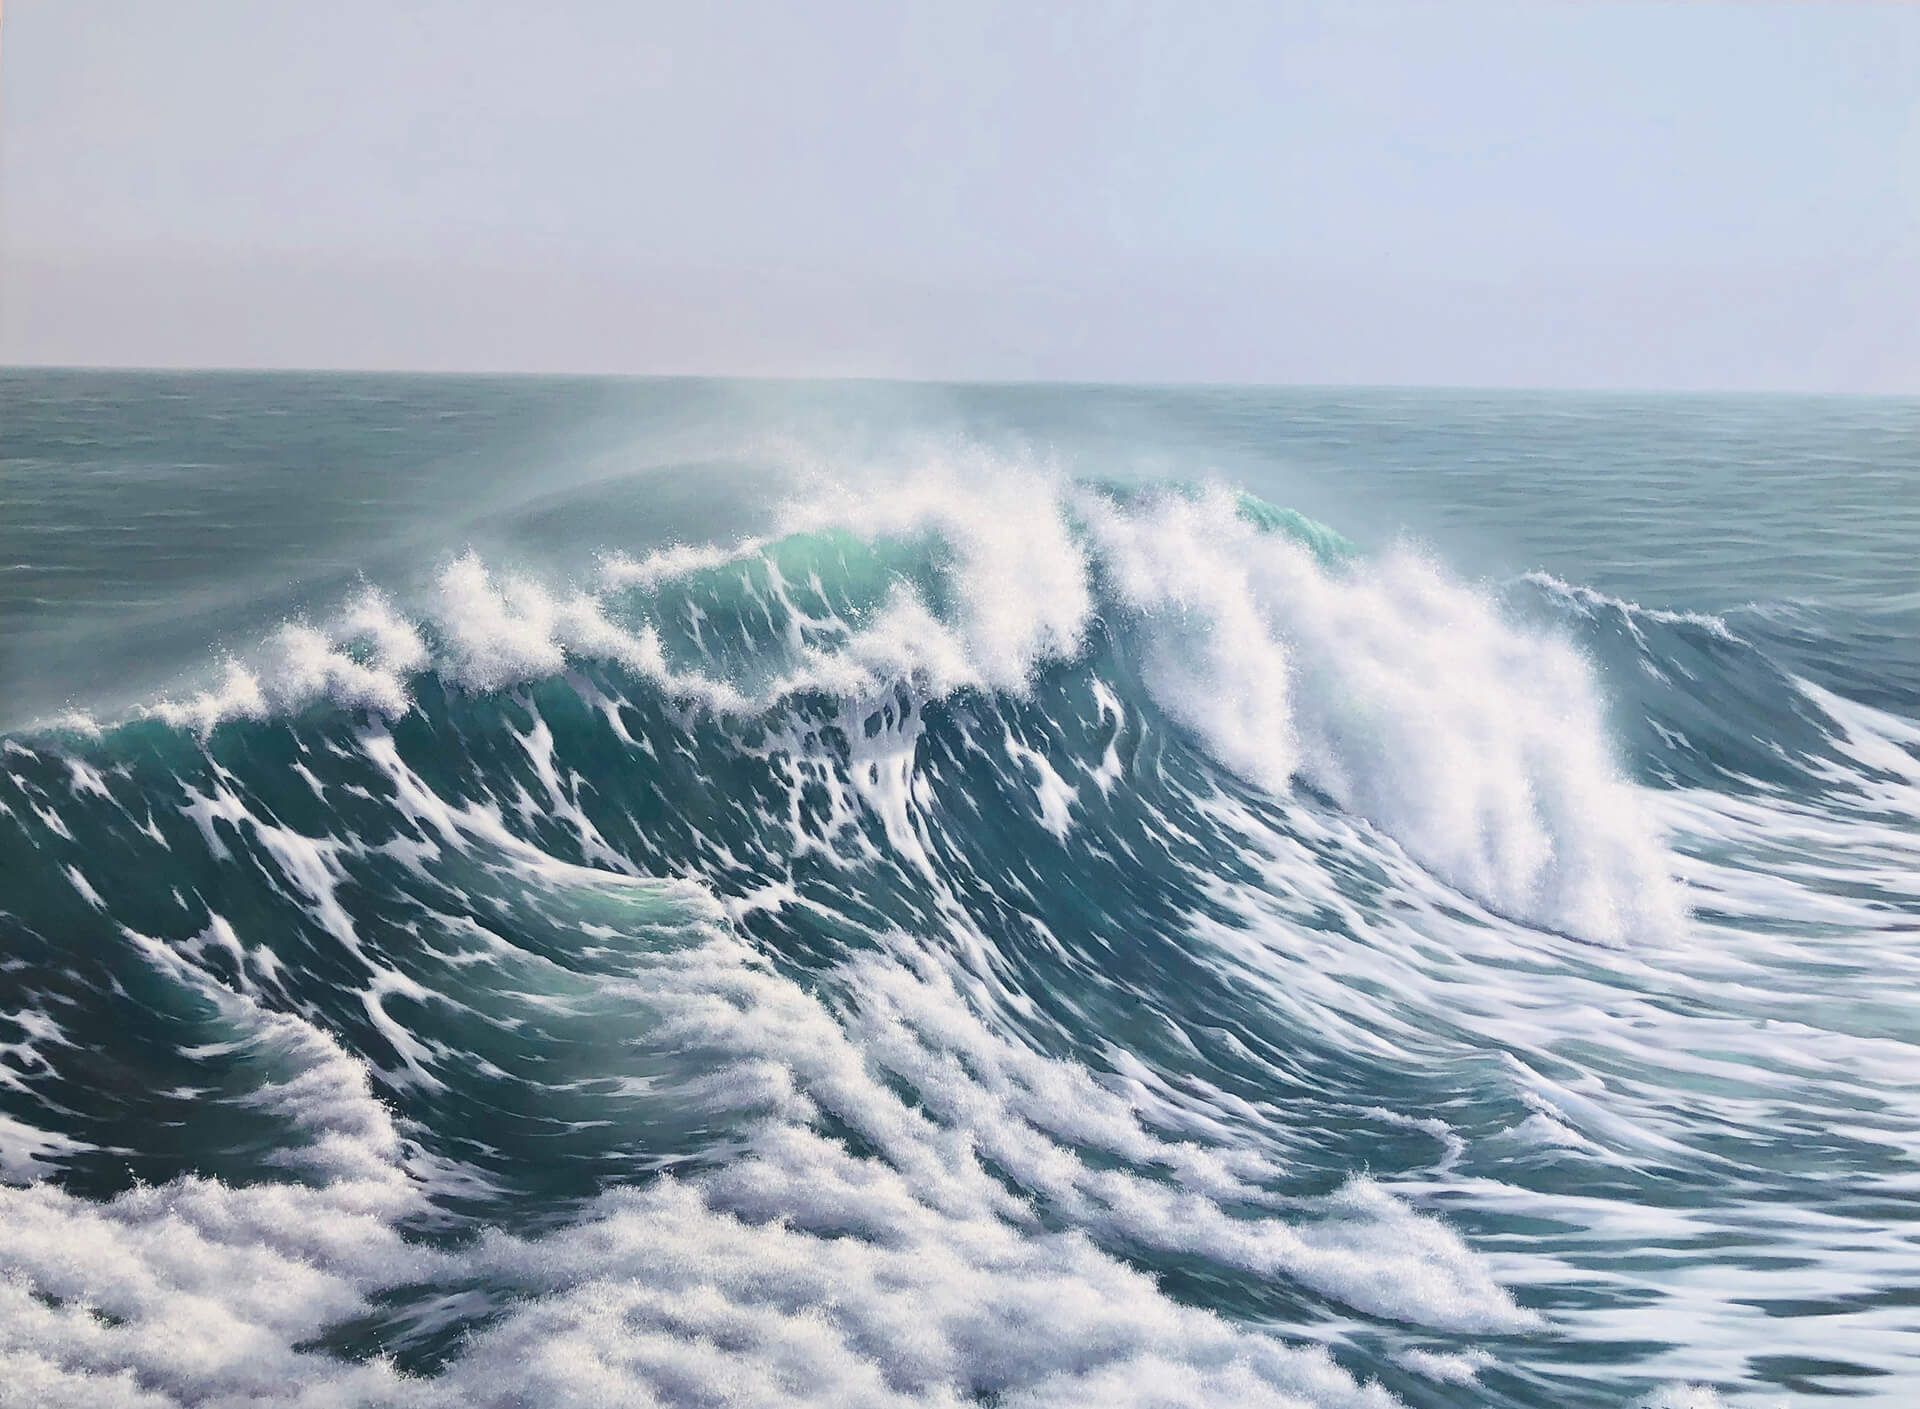 Photorealistic painting of a rogue wave